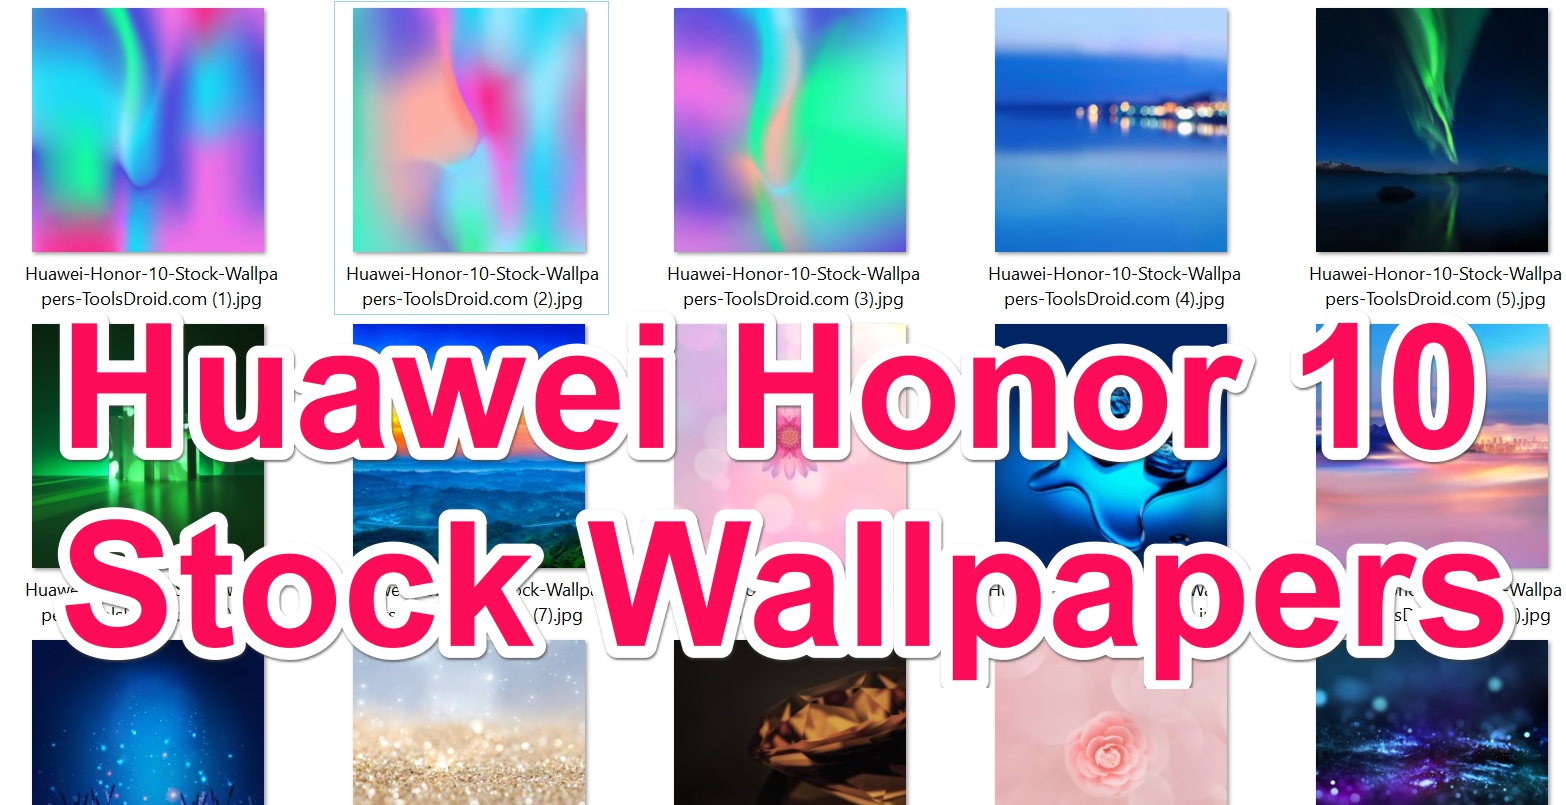 Huawei Honor 10 Stock Wallpapers download